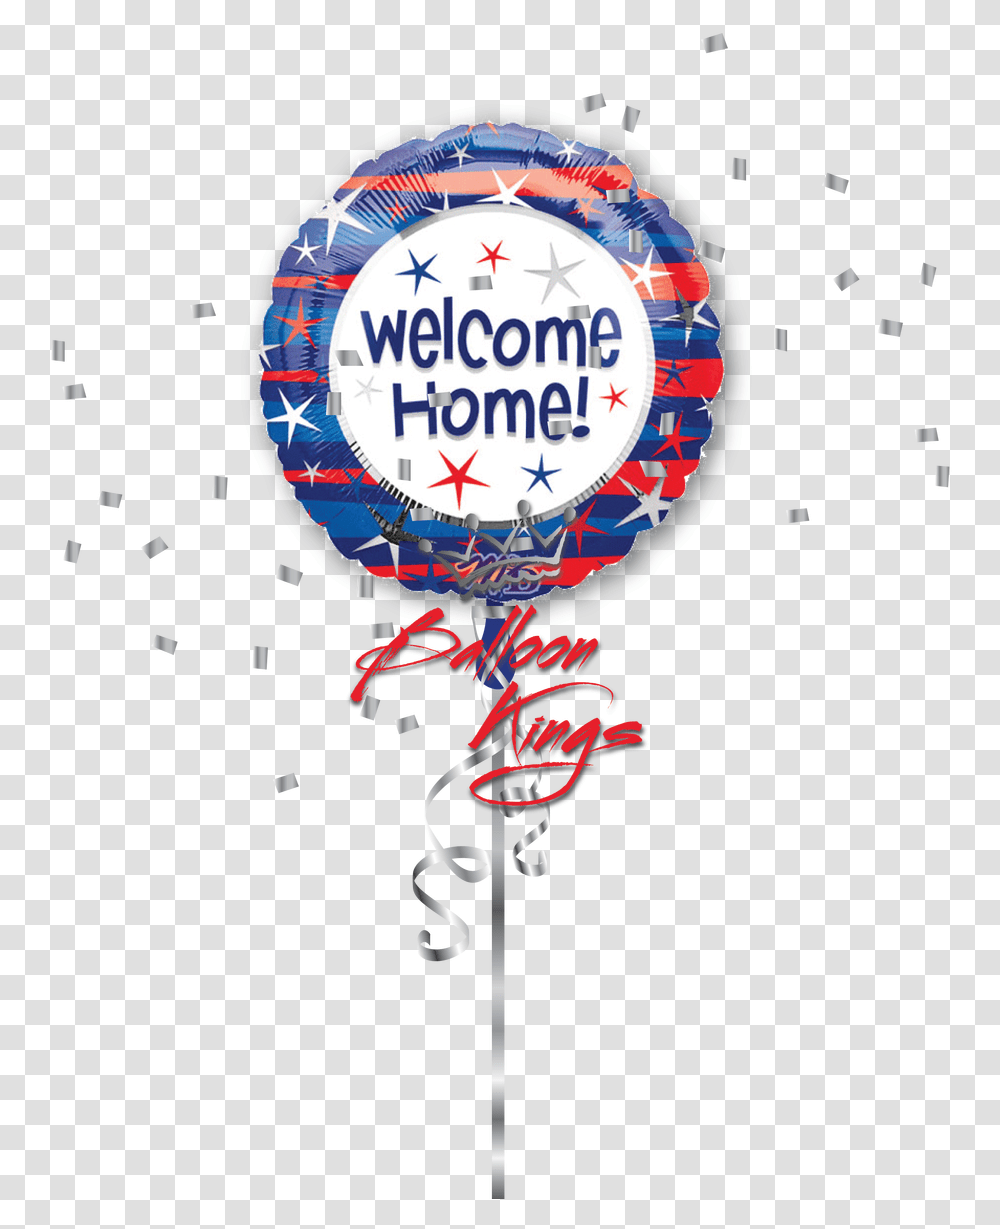 Welcome Home Stars Happy Birthday Princess Tiana, Clock Tower, Architecture, Building, Paper Transparent Png